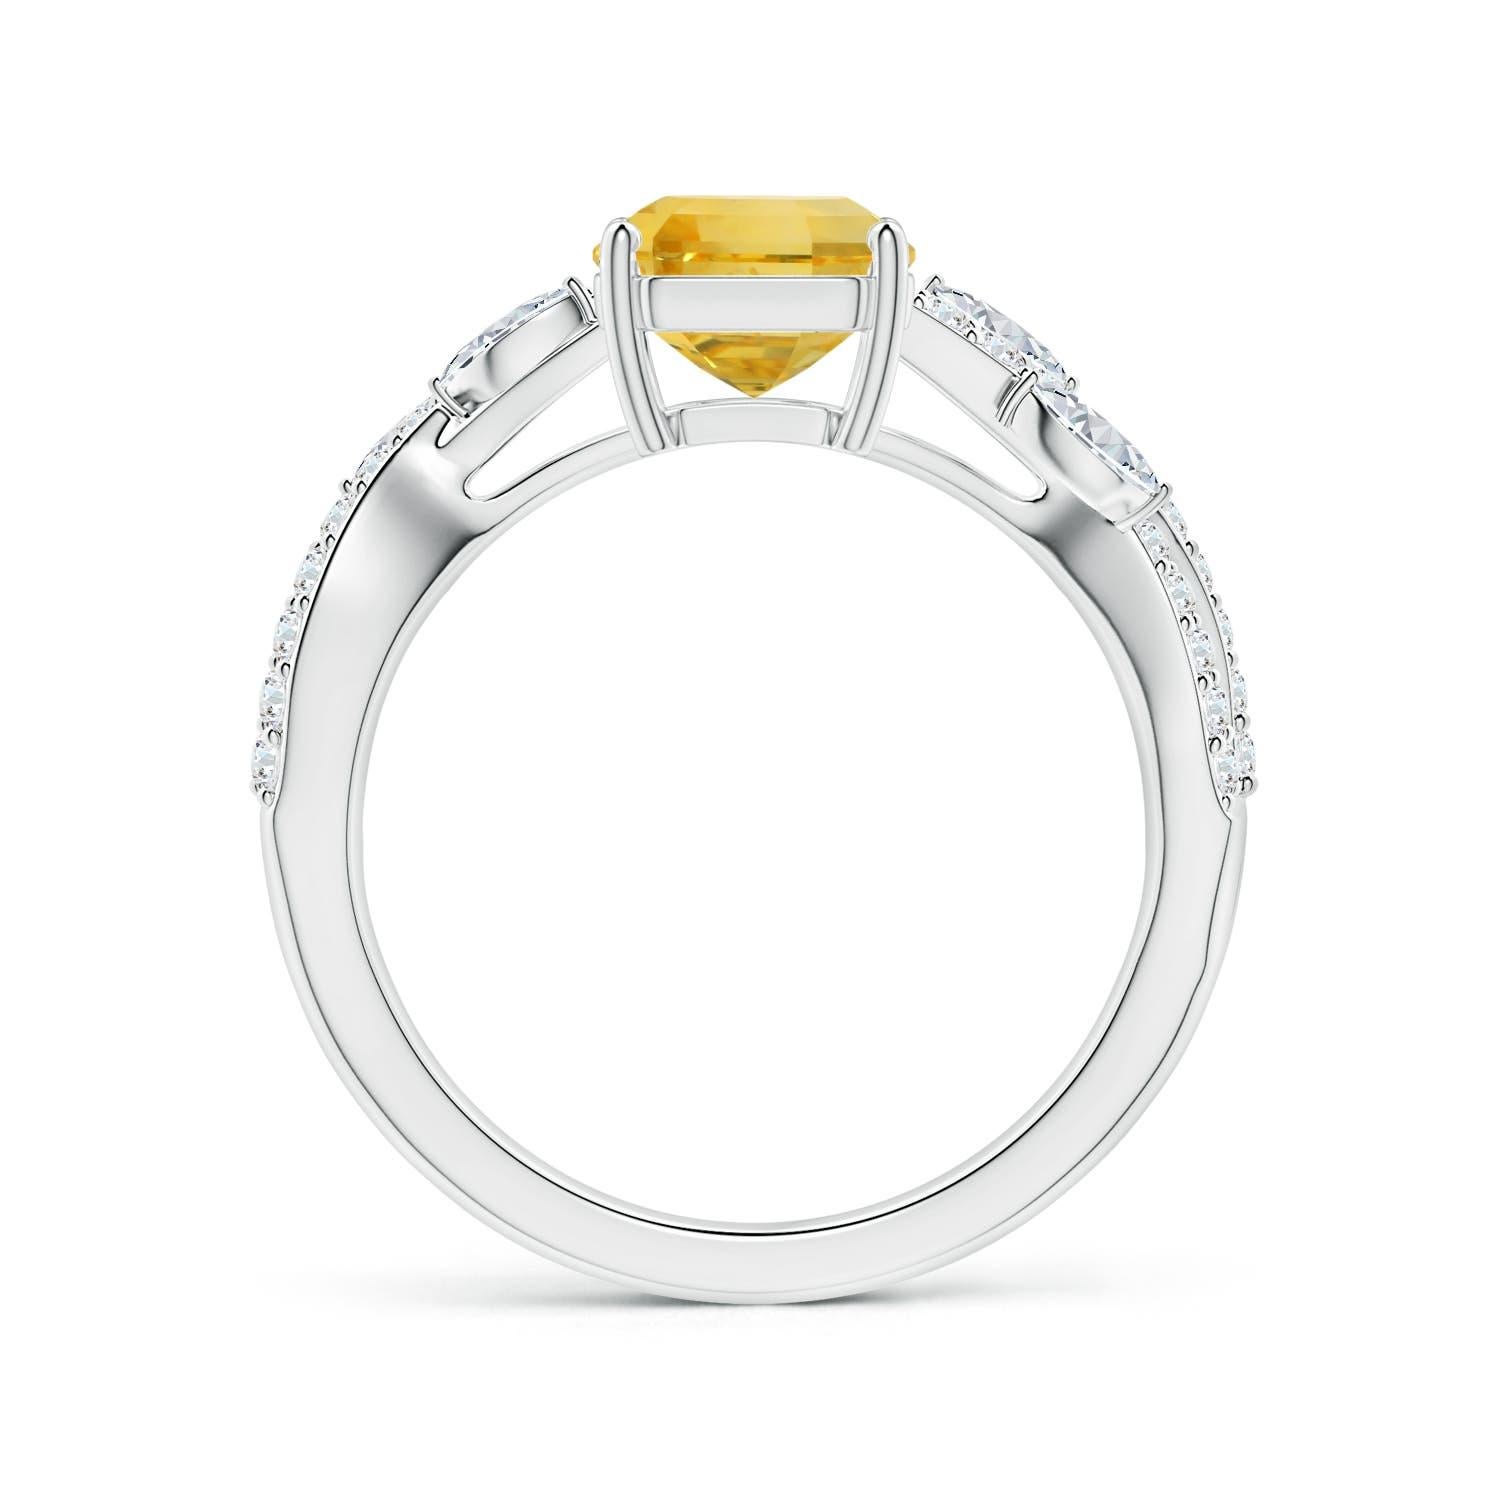 For Sale:  Angara Gia Certified Emerald-Cut Yellow Sapphire Diamond Ring in White Gold 2